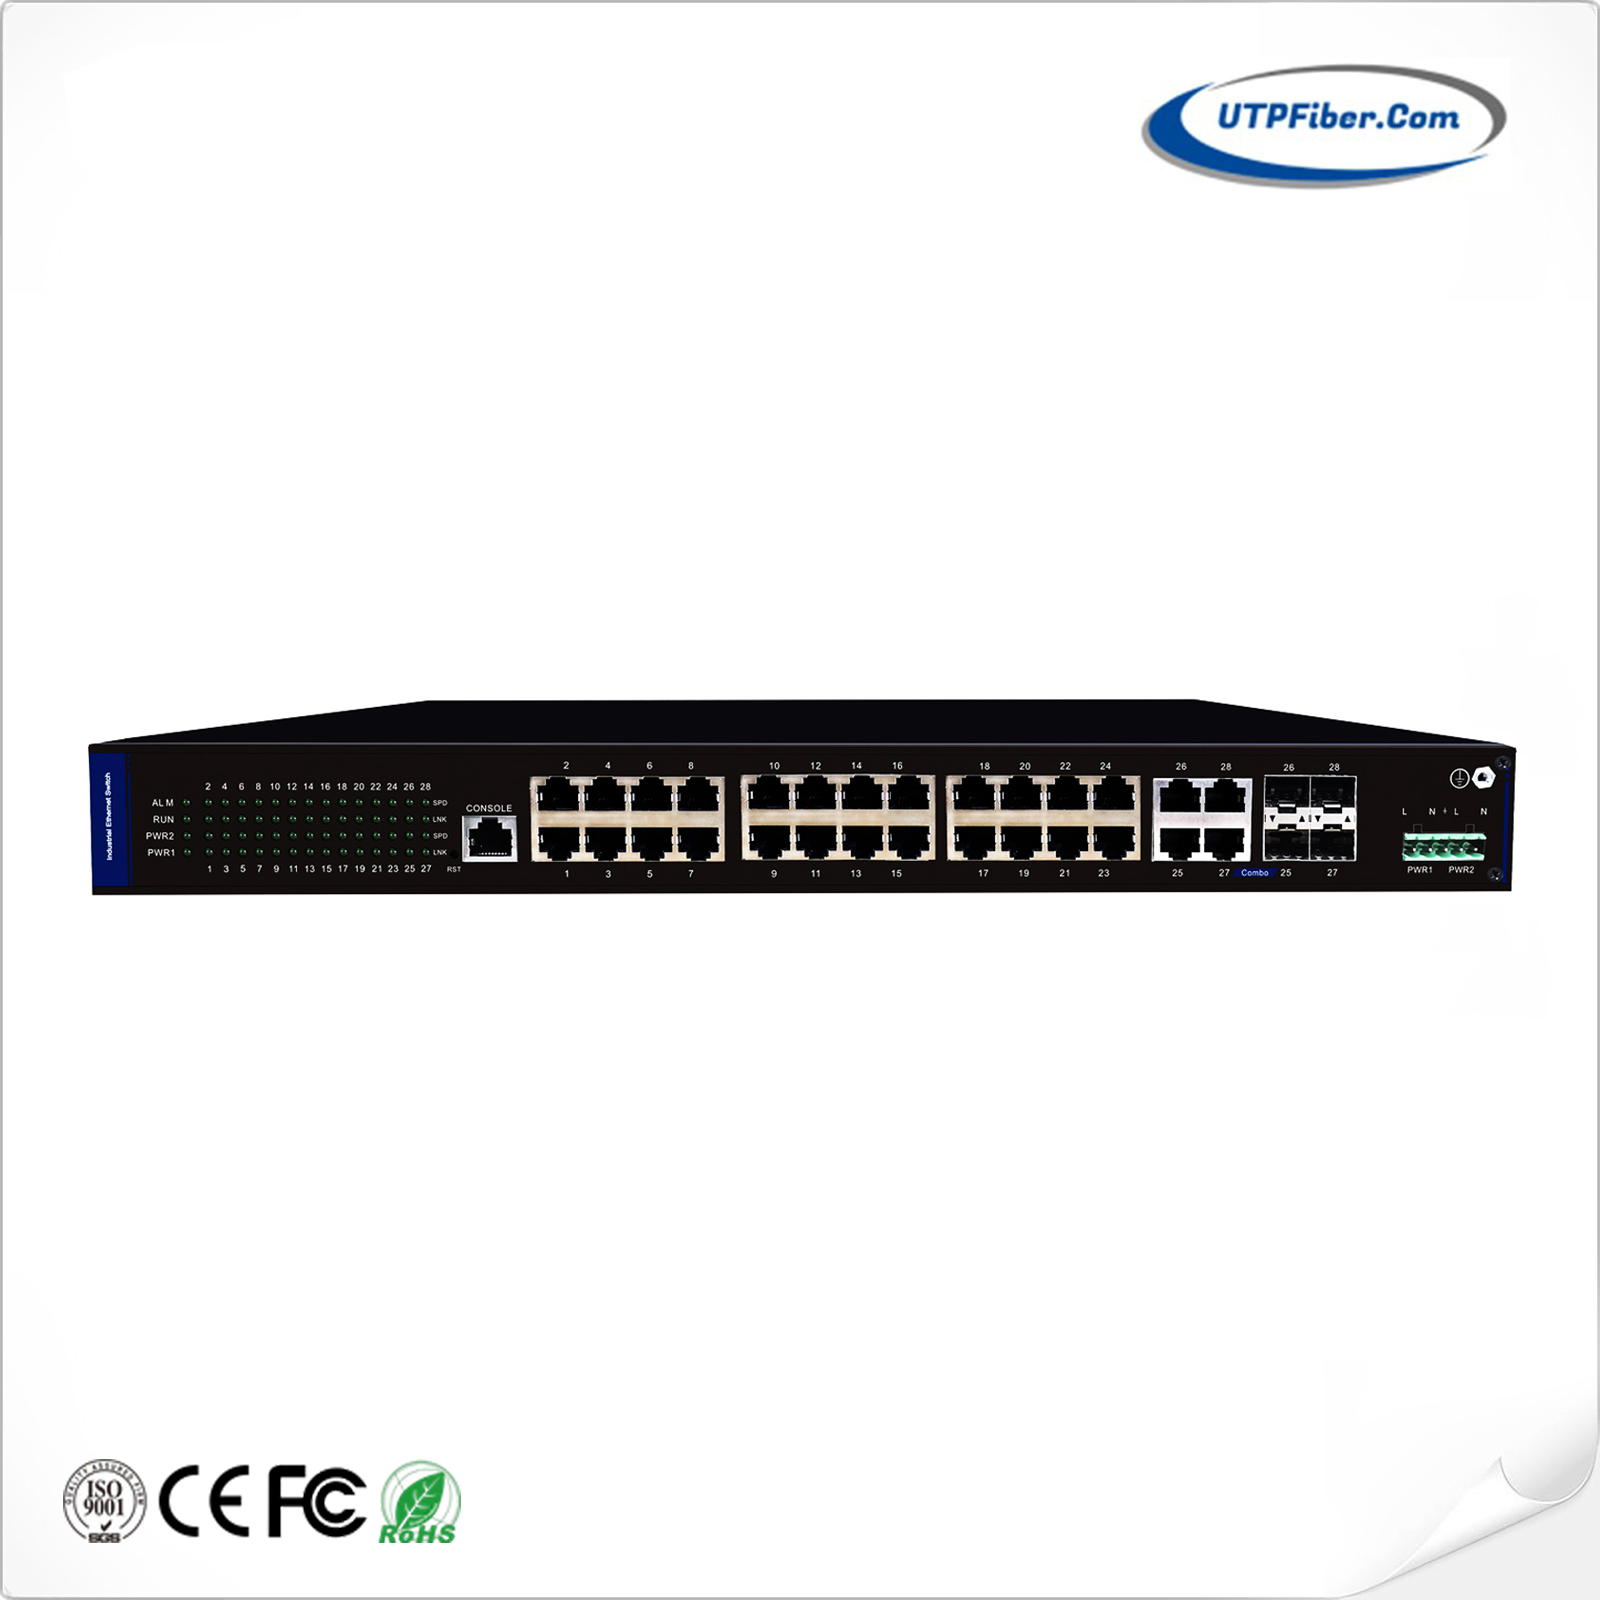 L2+ Industrial 24-Port 10/100/1000T 802.3at PoE + 4-Port TP/SFP Combo Managed Ethernet Switch